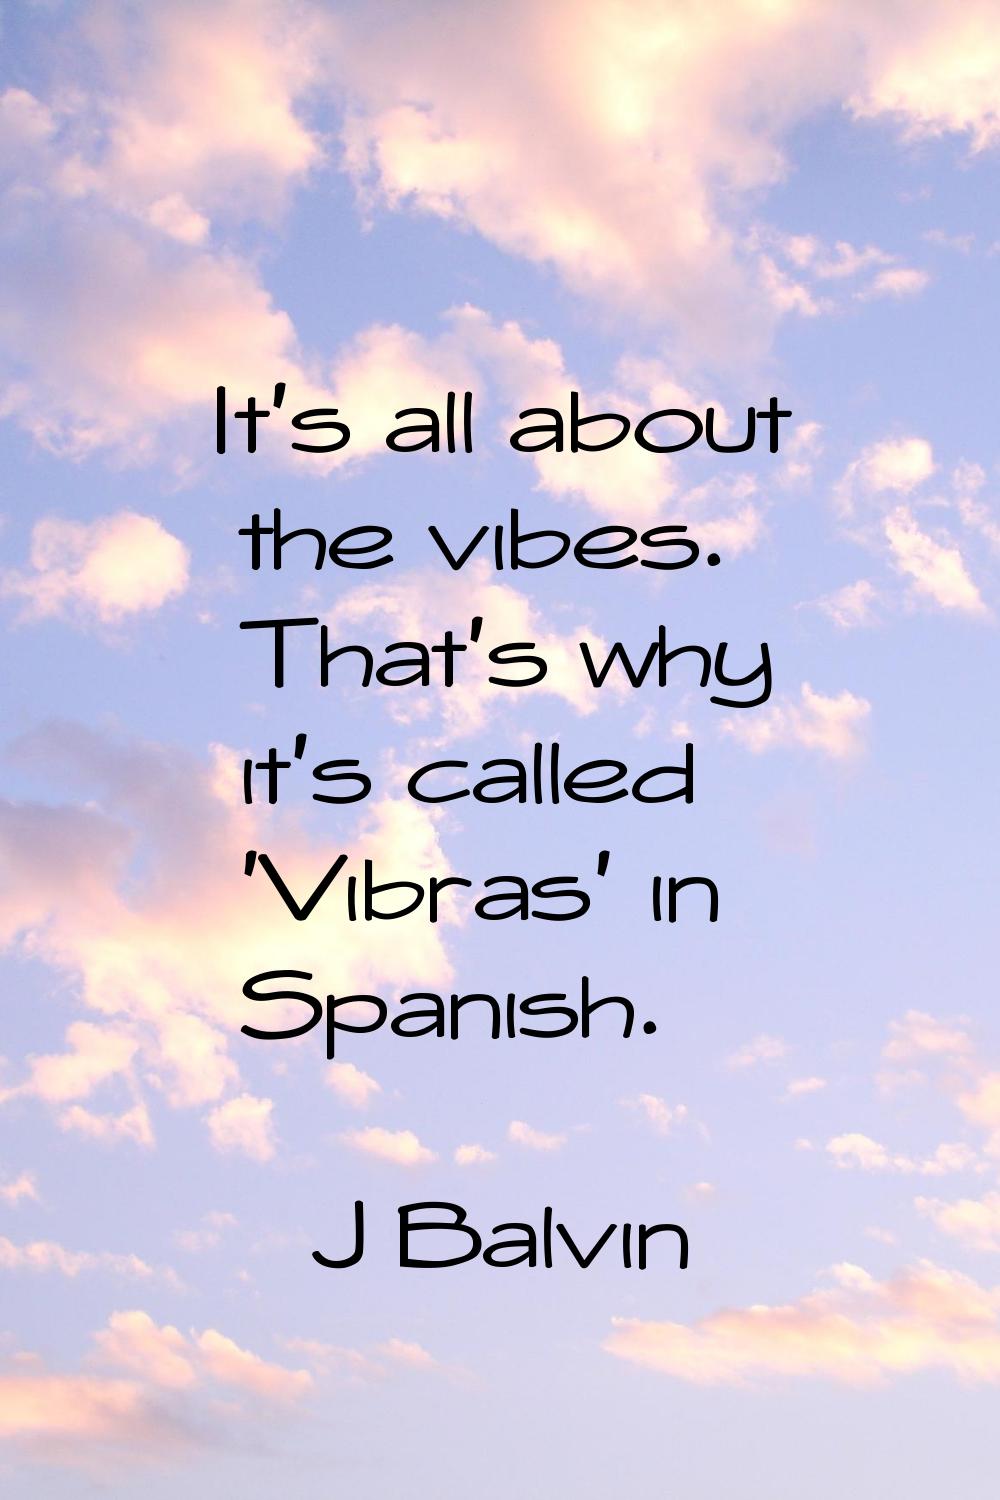 It's all about the vibes. That's why it's called 'Vibras' in Spanish.